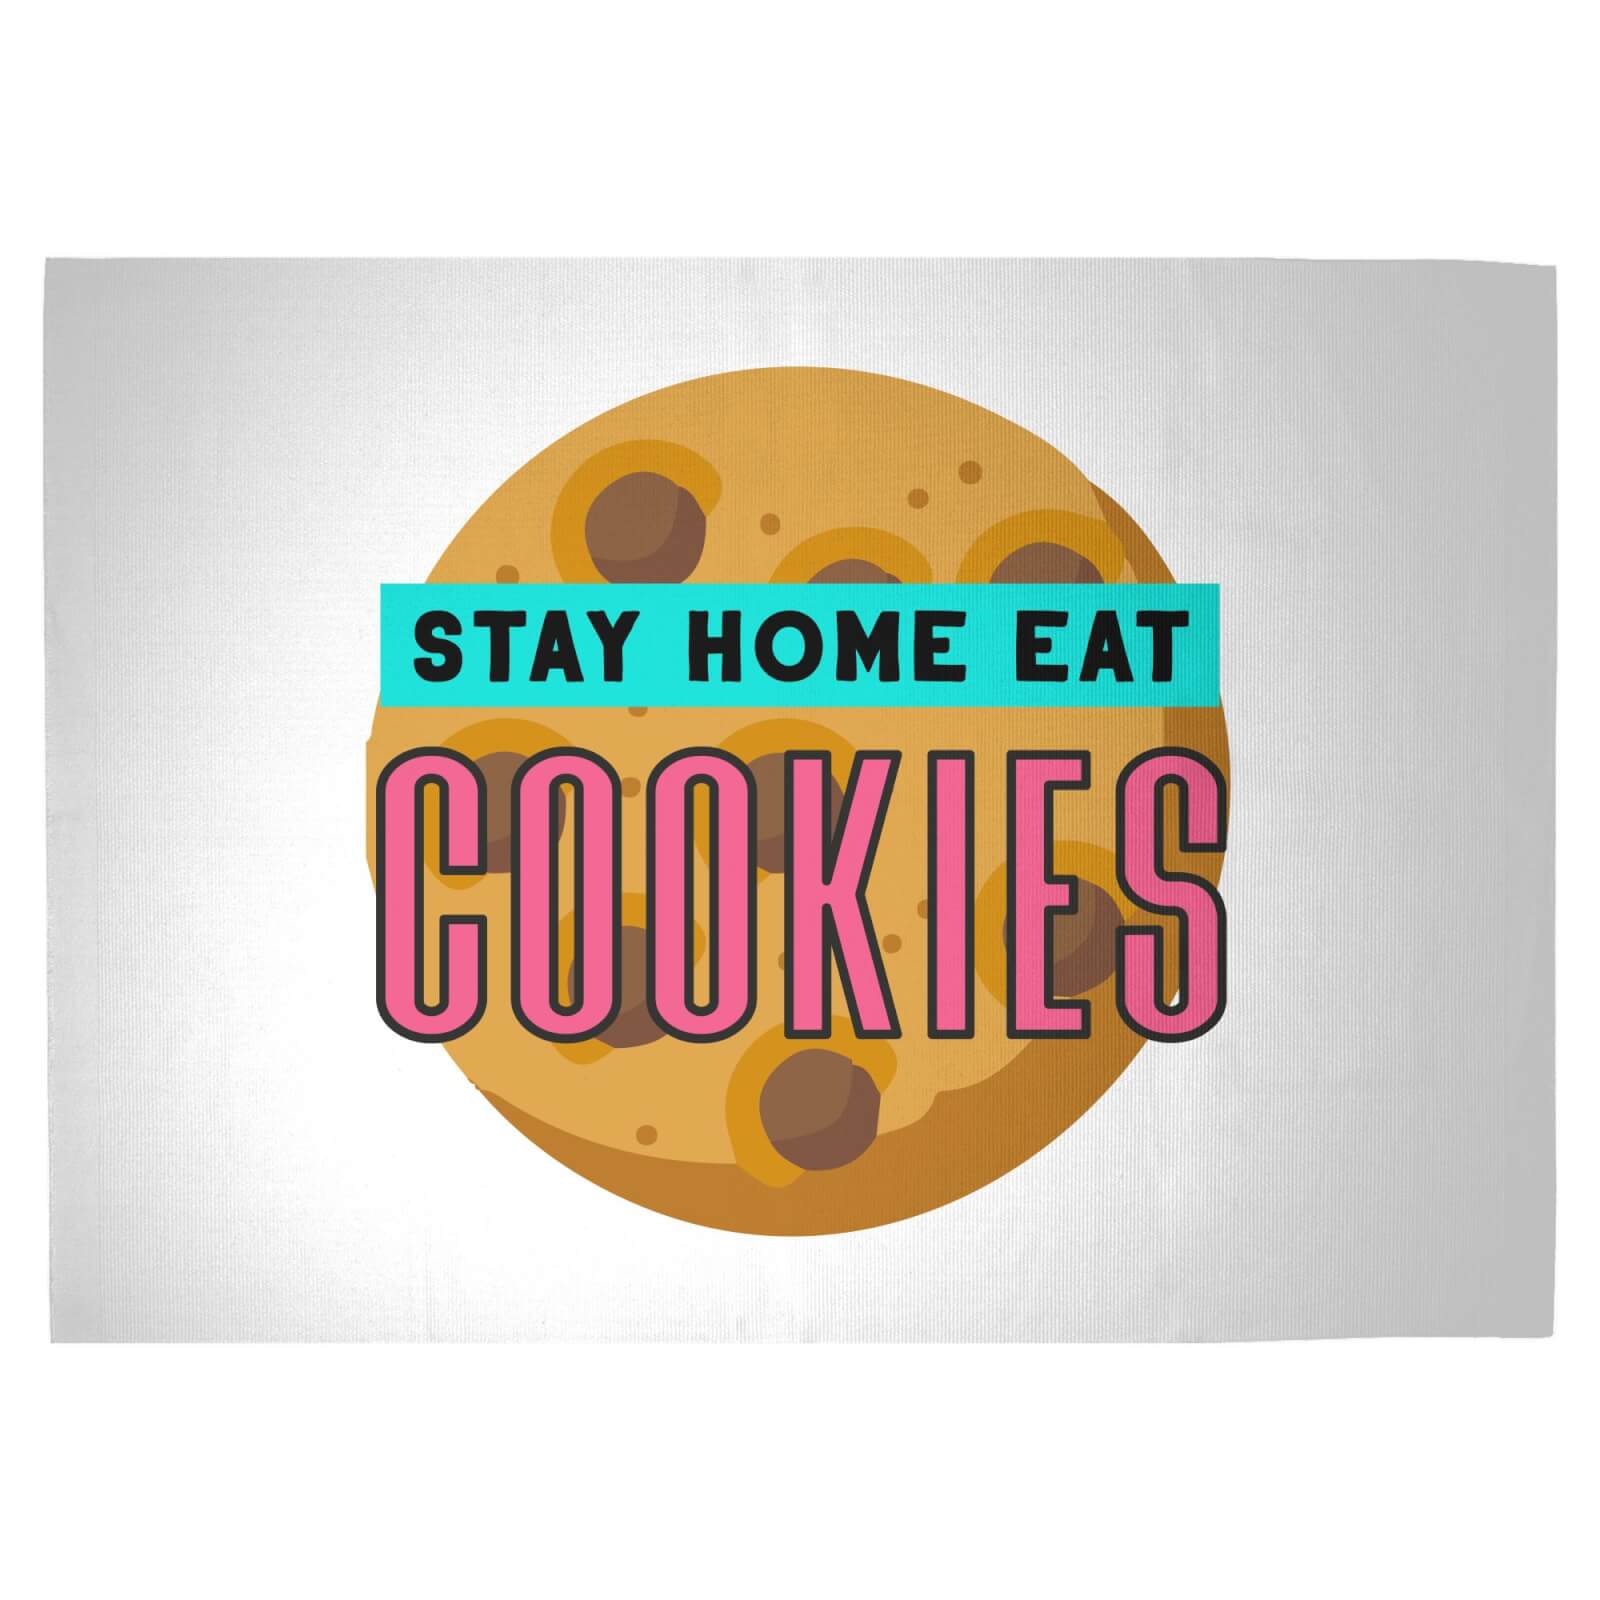 Stay Home Eat Cookies Woven Rug - Large